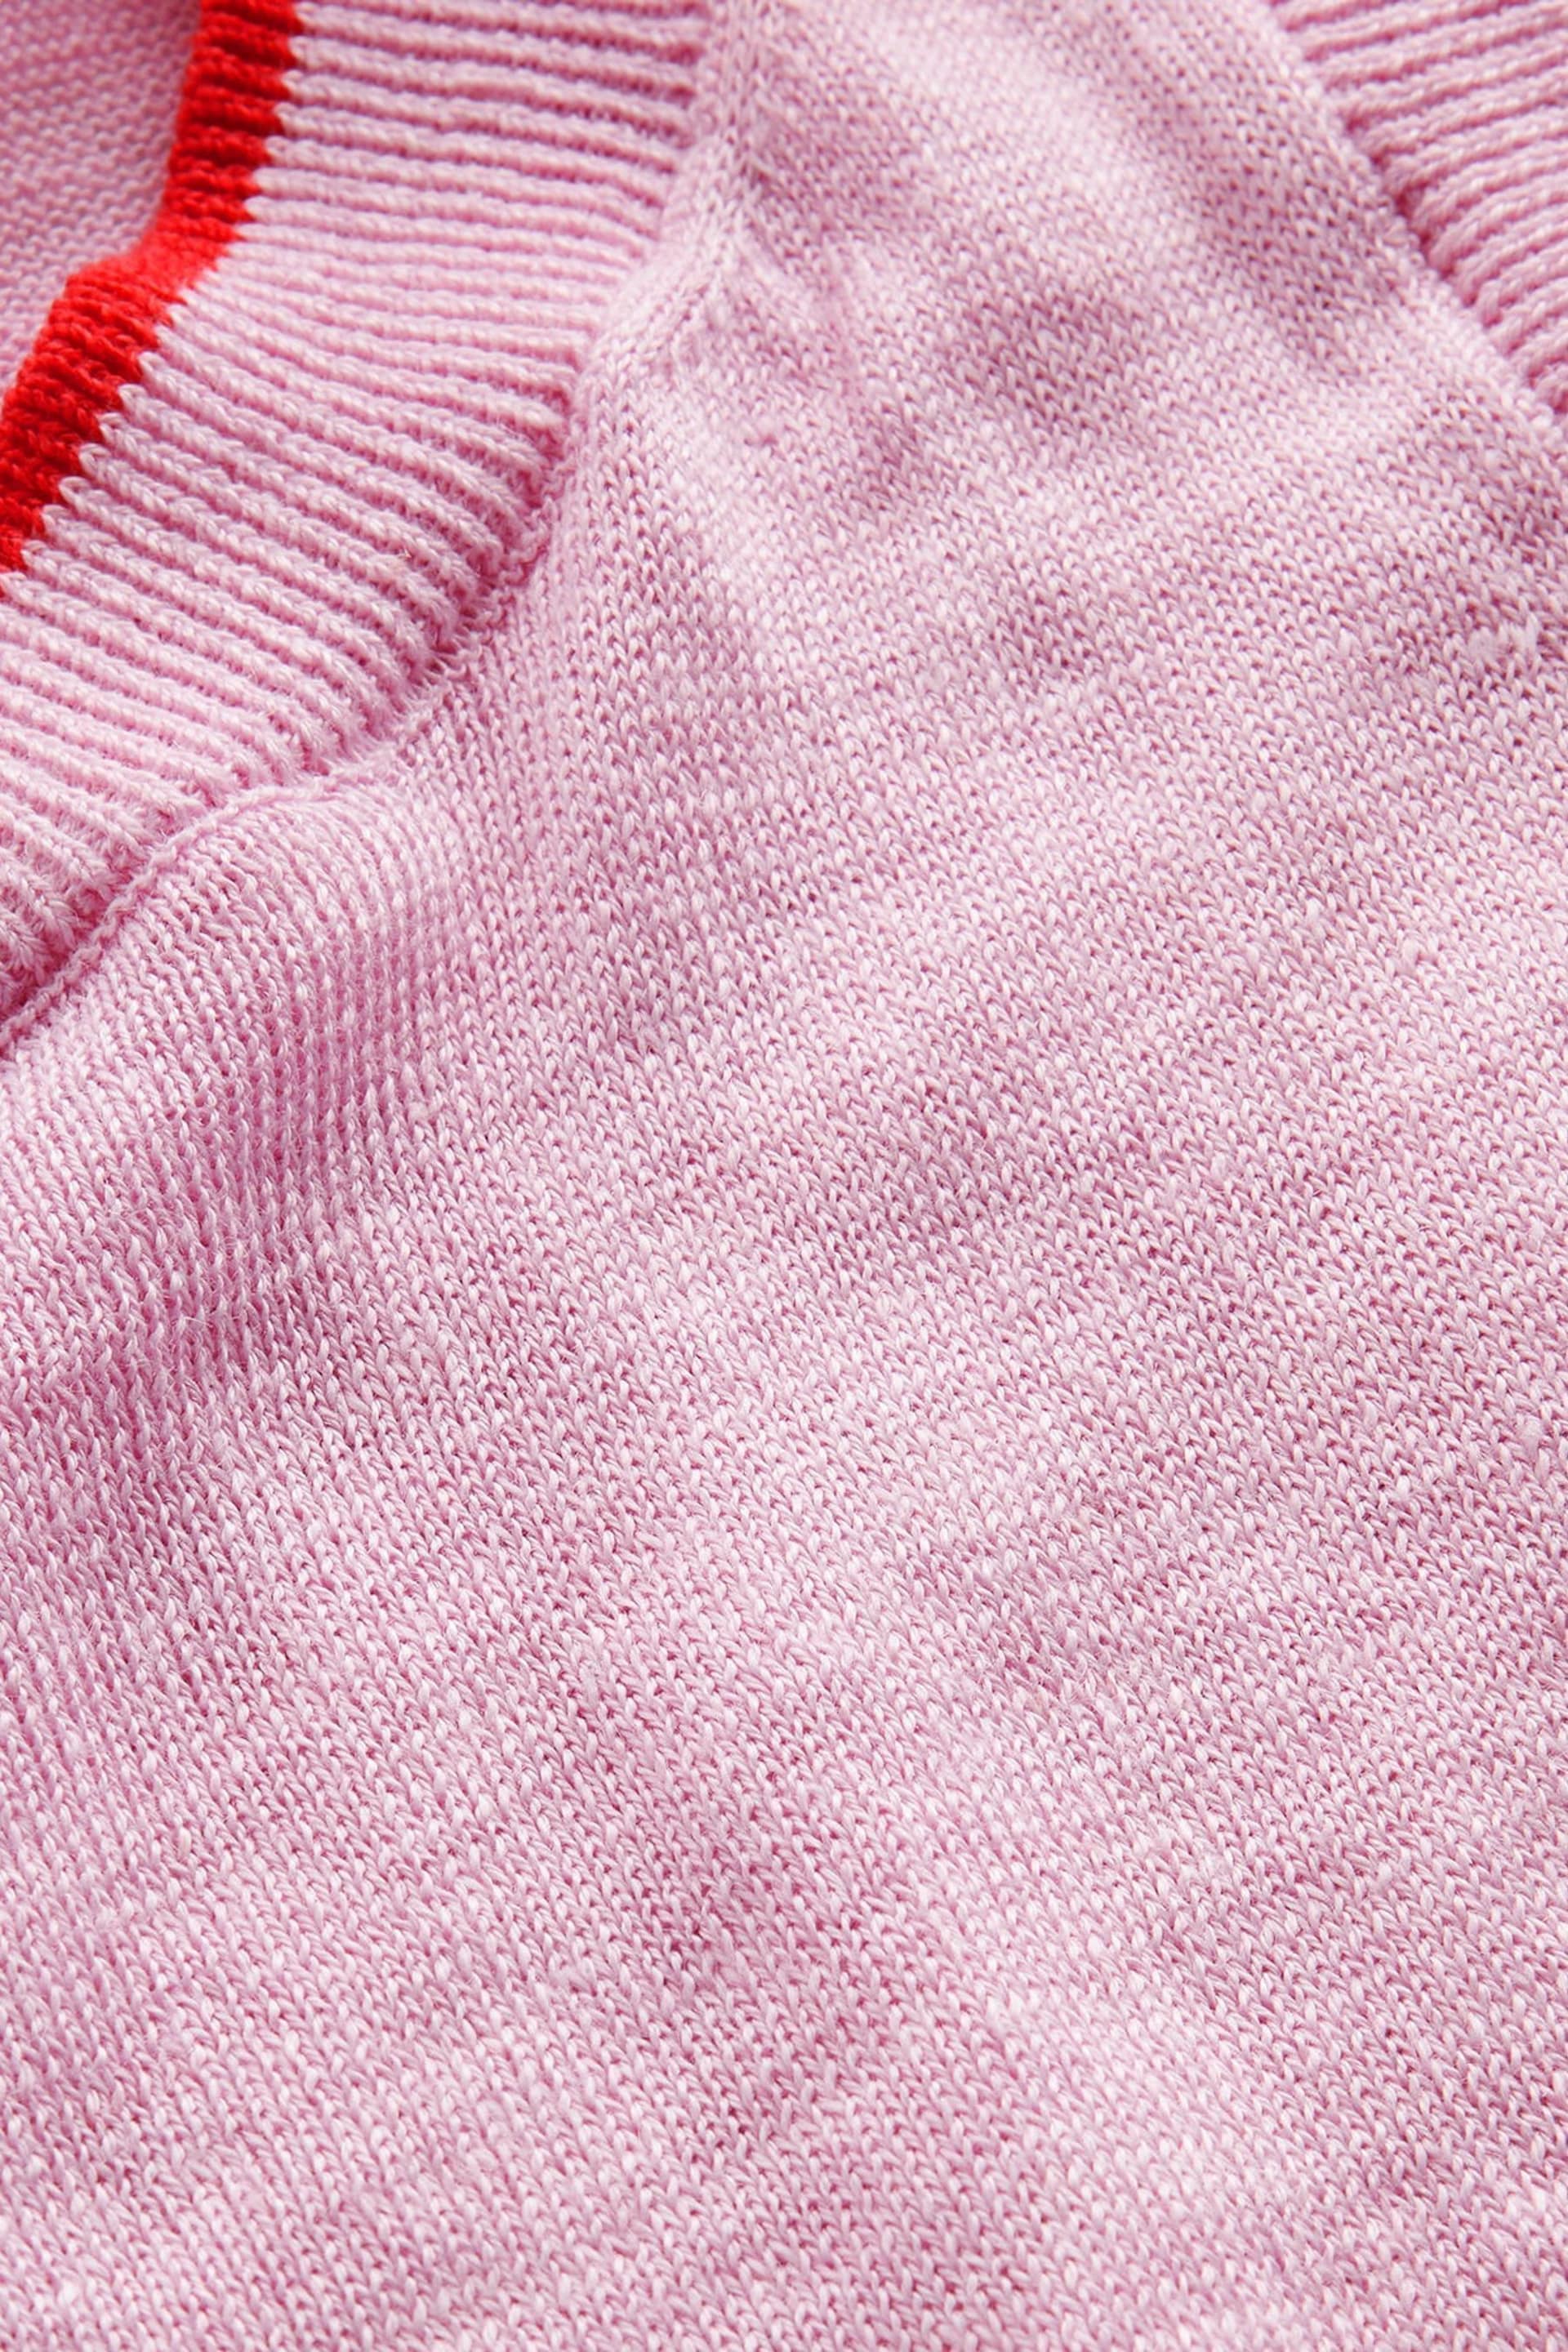 Boden Pink Maggie Linen Tank - Image 7 of 7